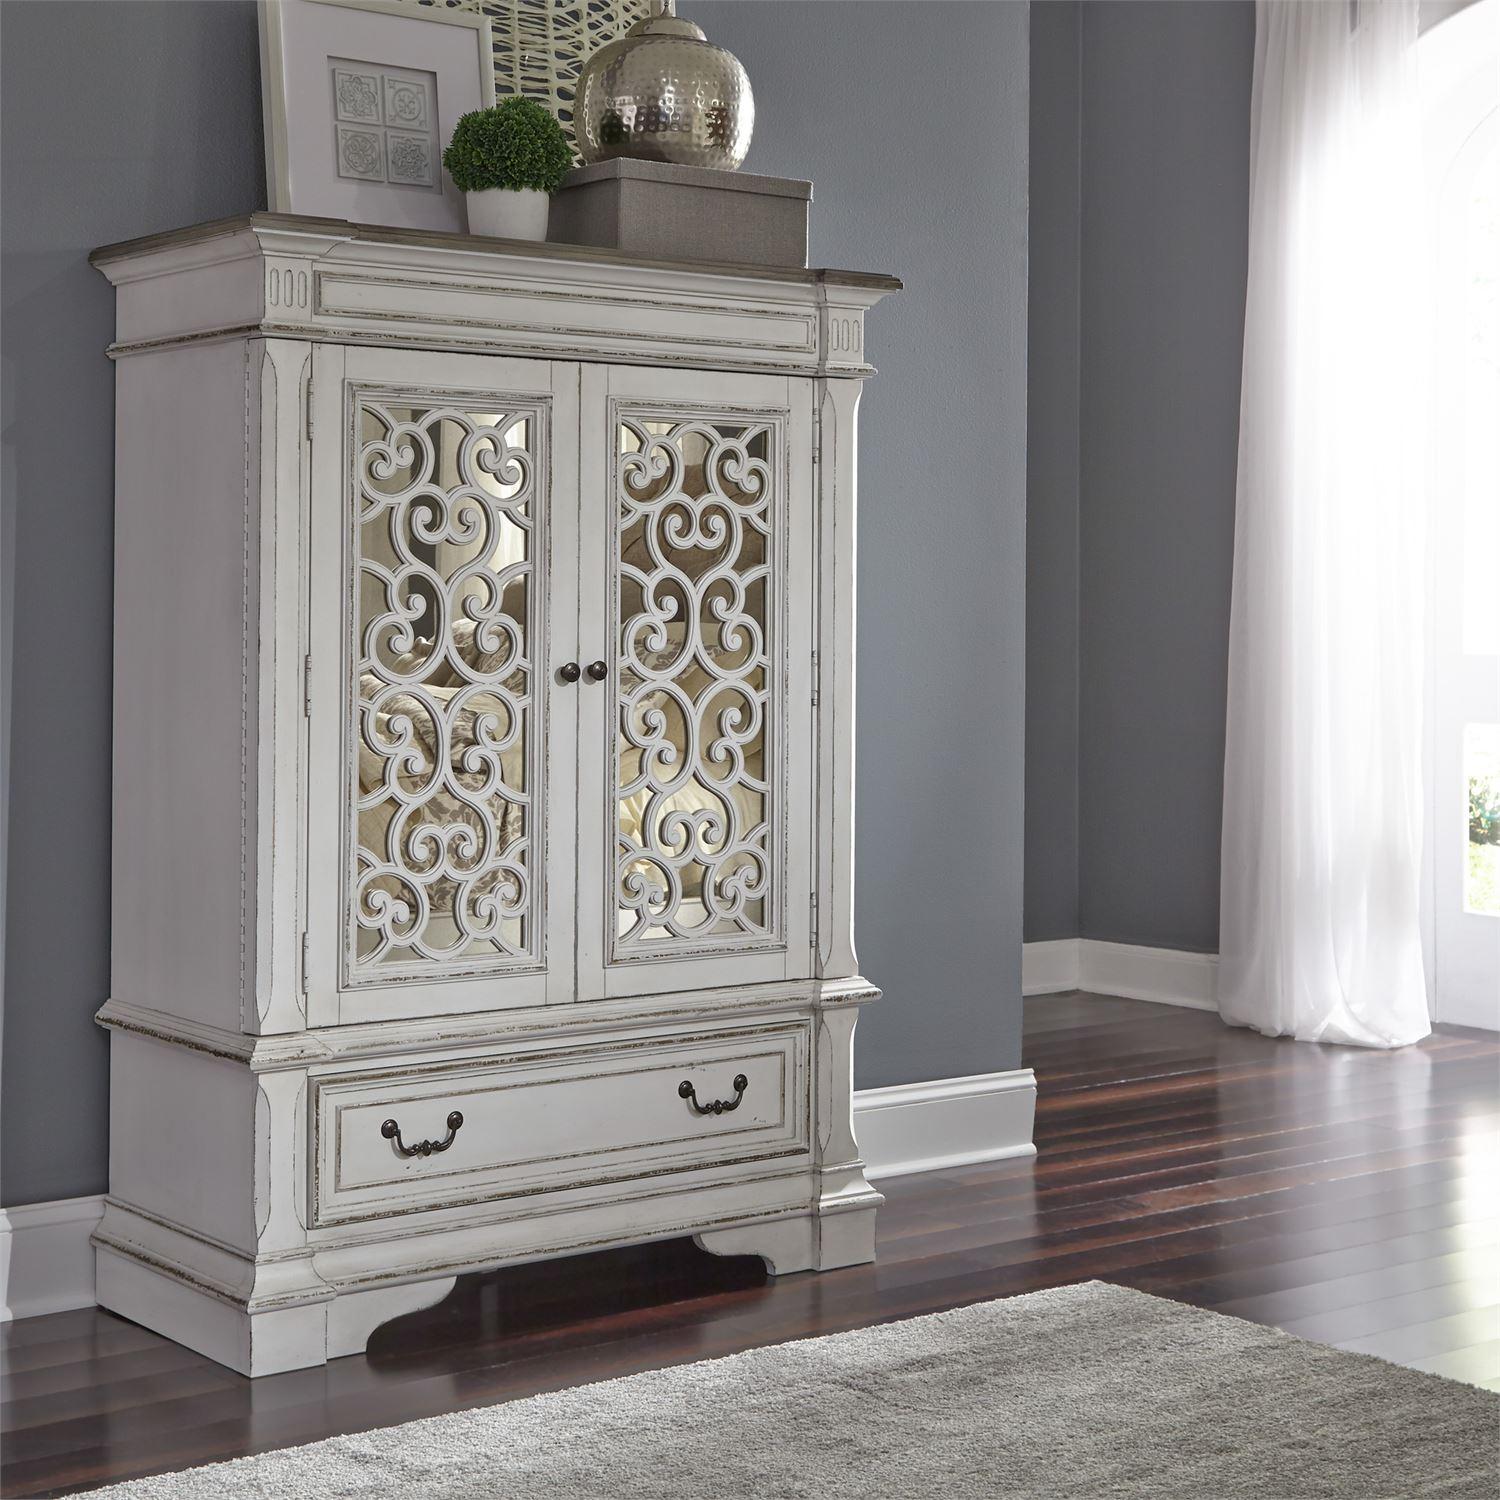 Traditional Gentelment Chest Abbey Park 520-BR42 520-BR42 in White 